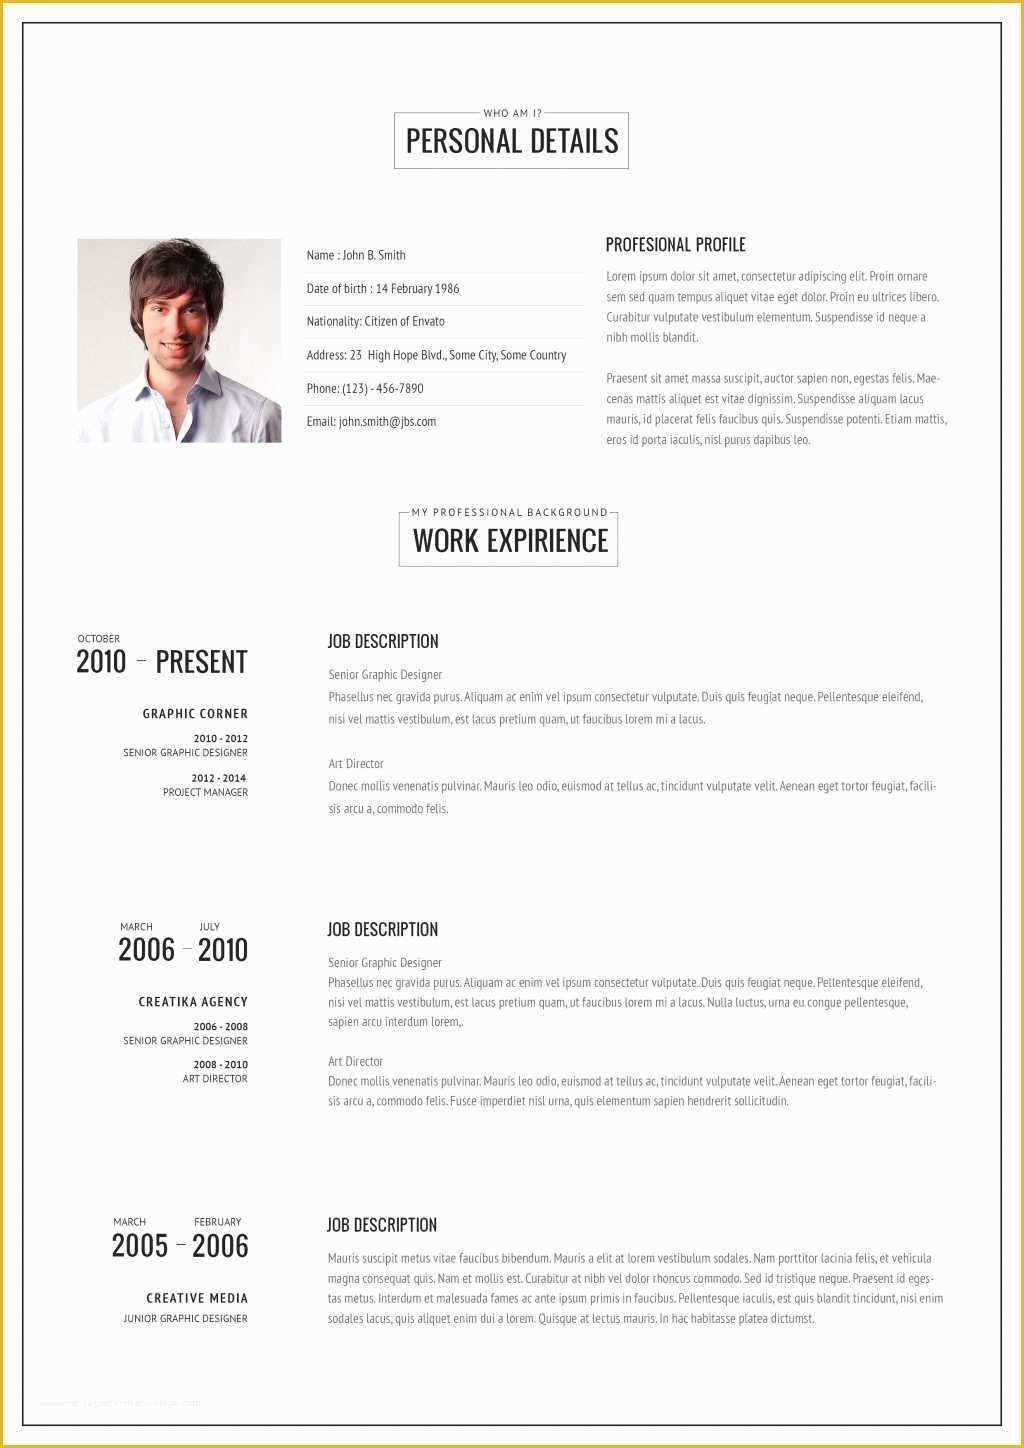 Free Apple Pages Resume Templates Of Resume and Template Remarkable Mac Pages Resume Templates